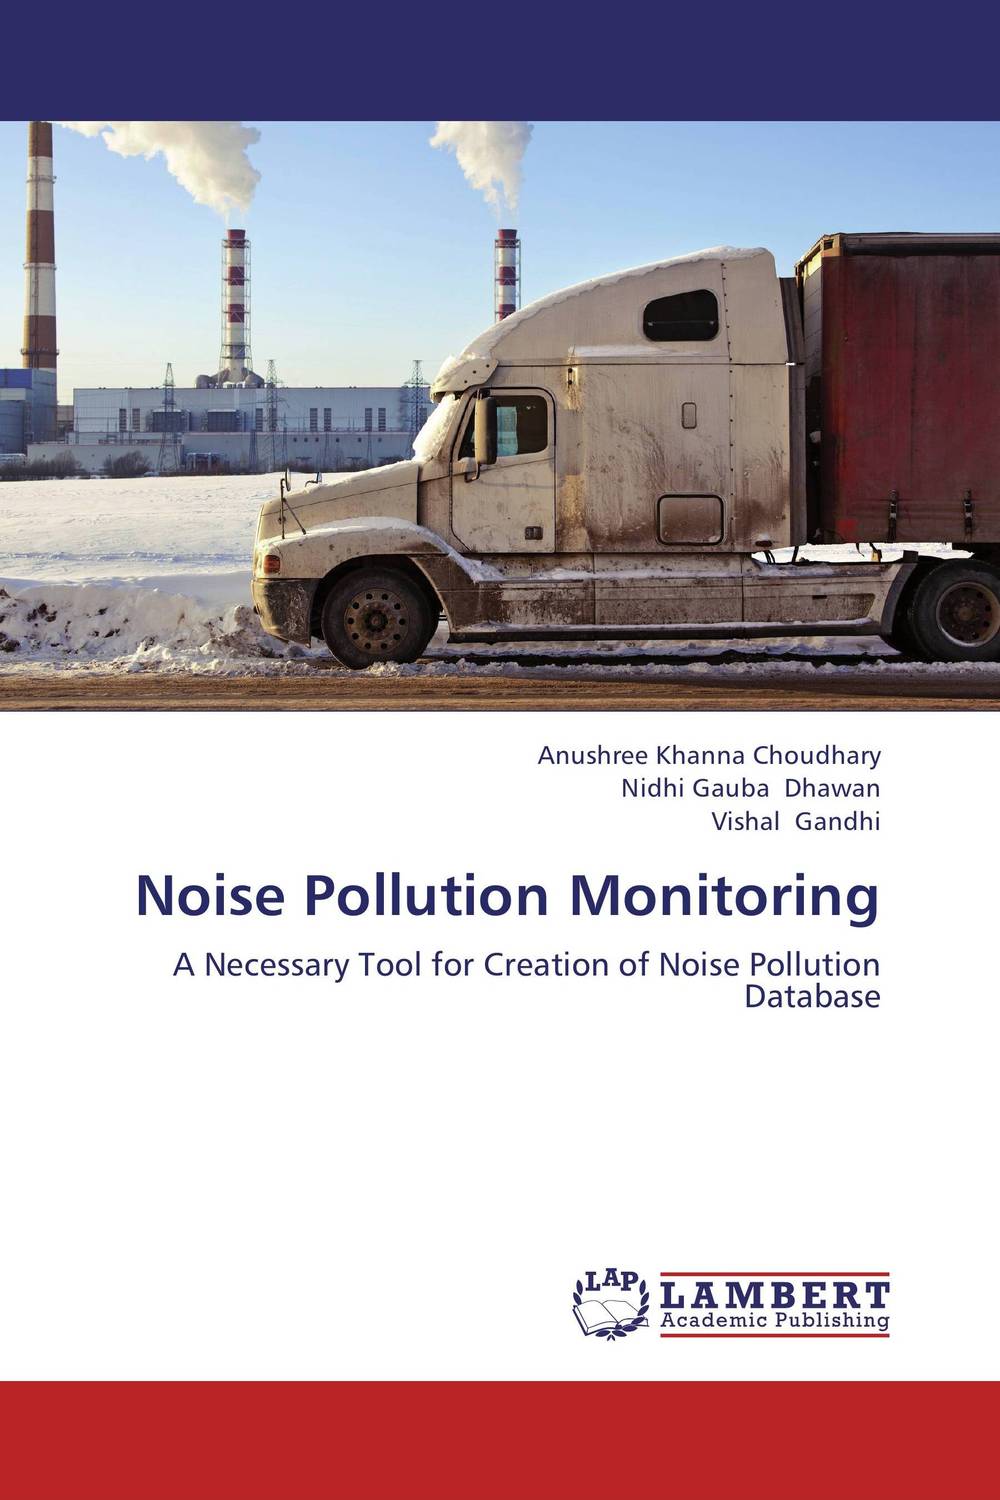 Noise Pollution Monitoring